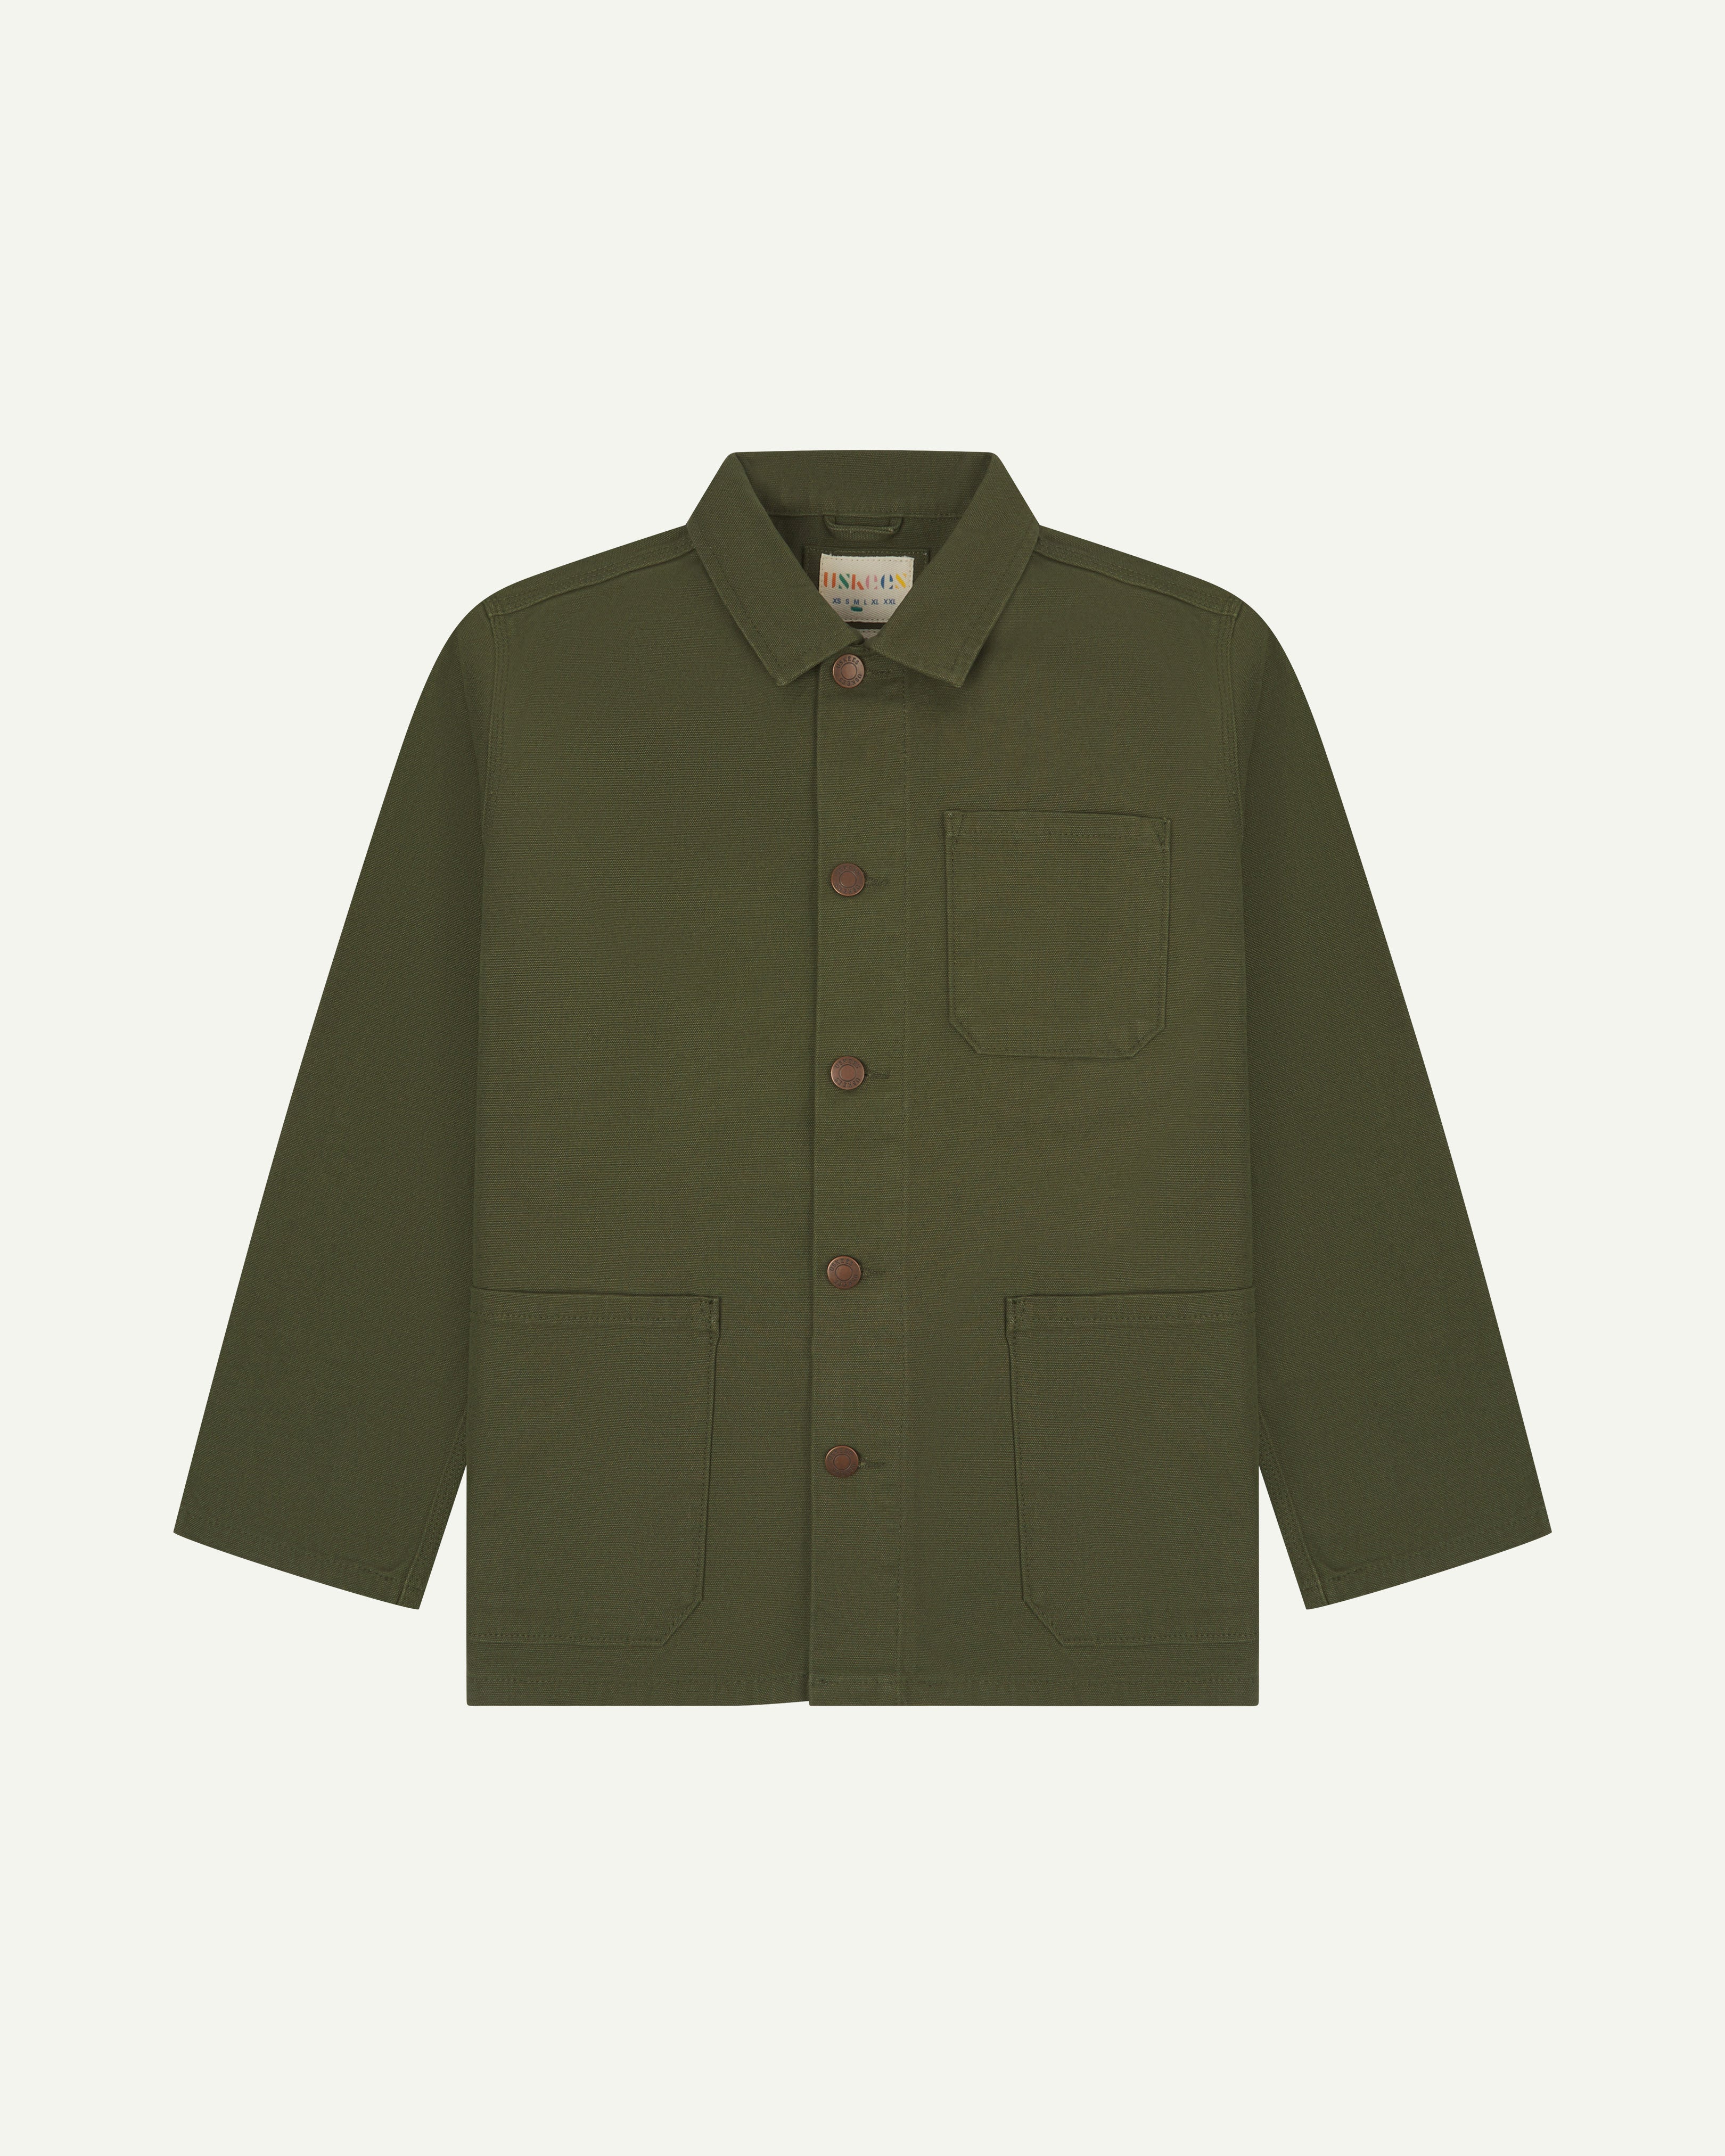 Front view of uskees mid-green canvas men's overshirt presented buttoned up showing the 3 front pockets.